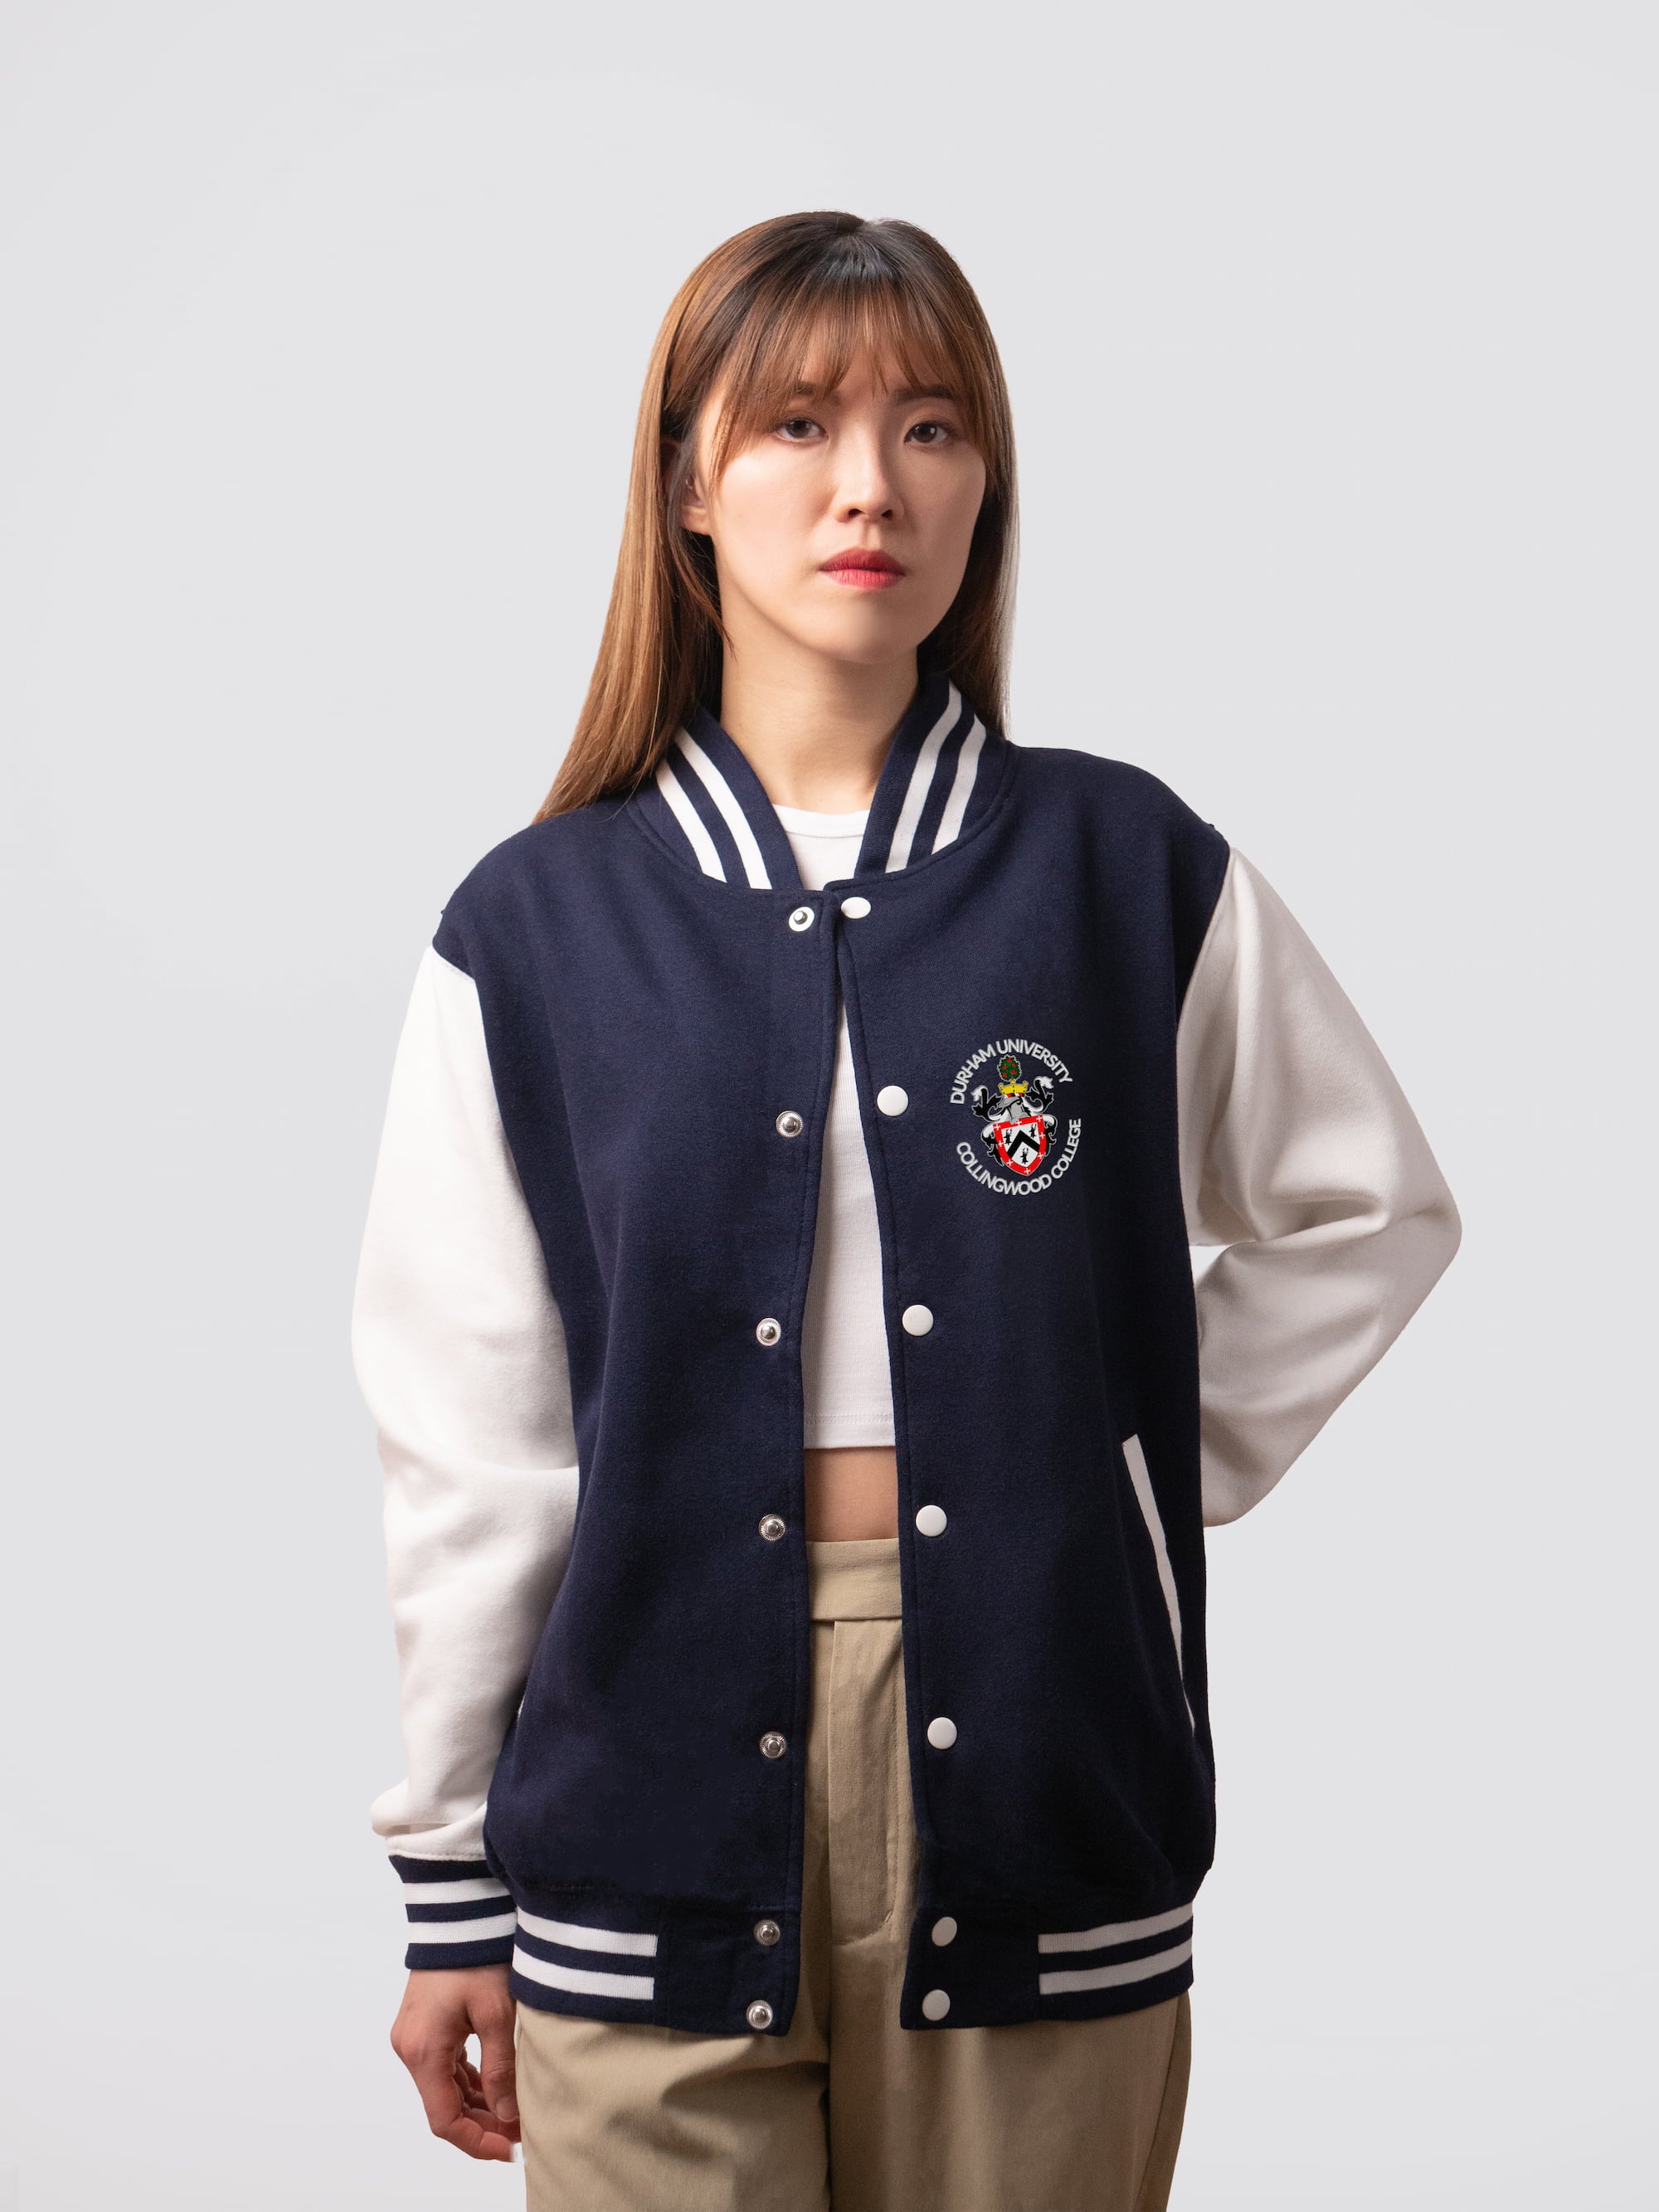 Retro style varsity jacket, with embroidered Collingwood crest